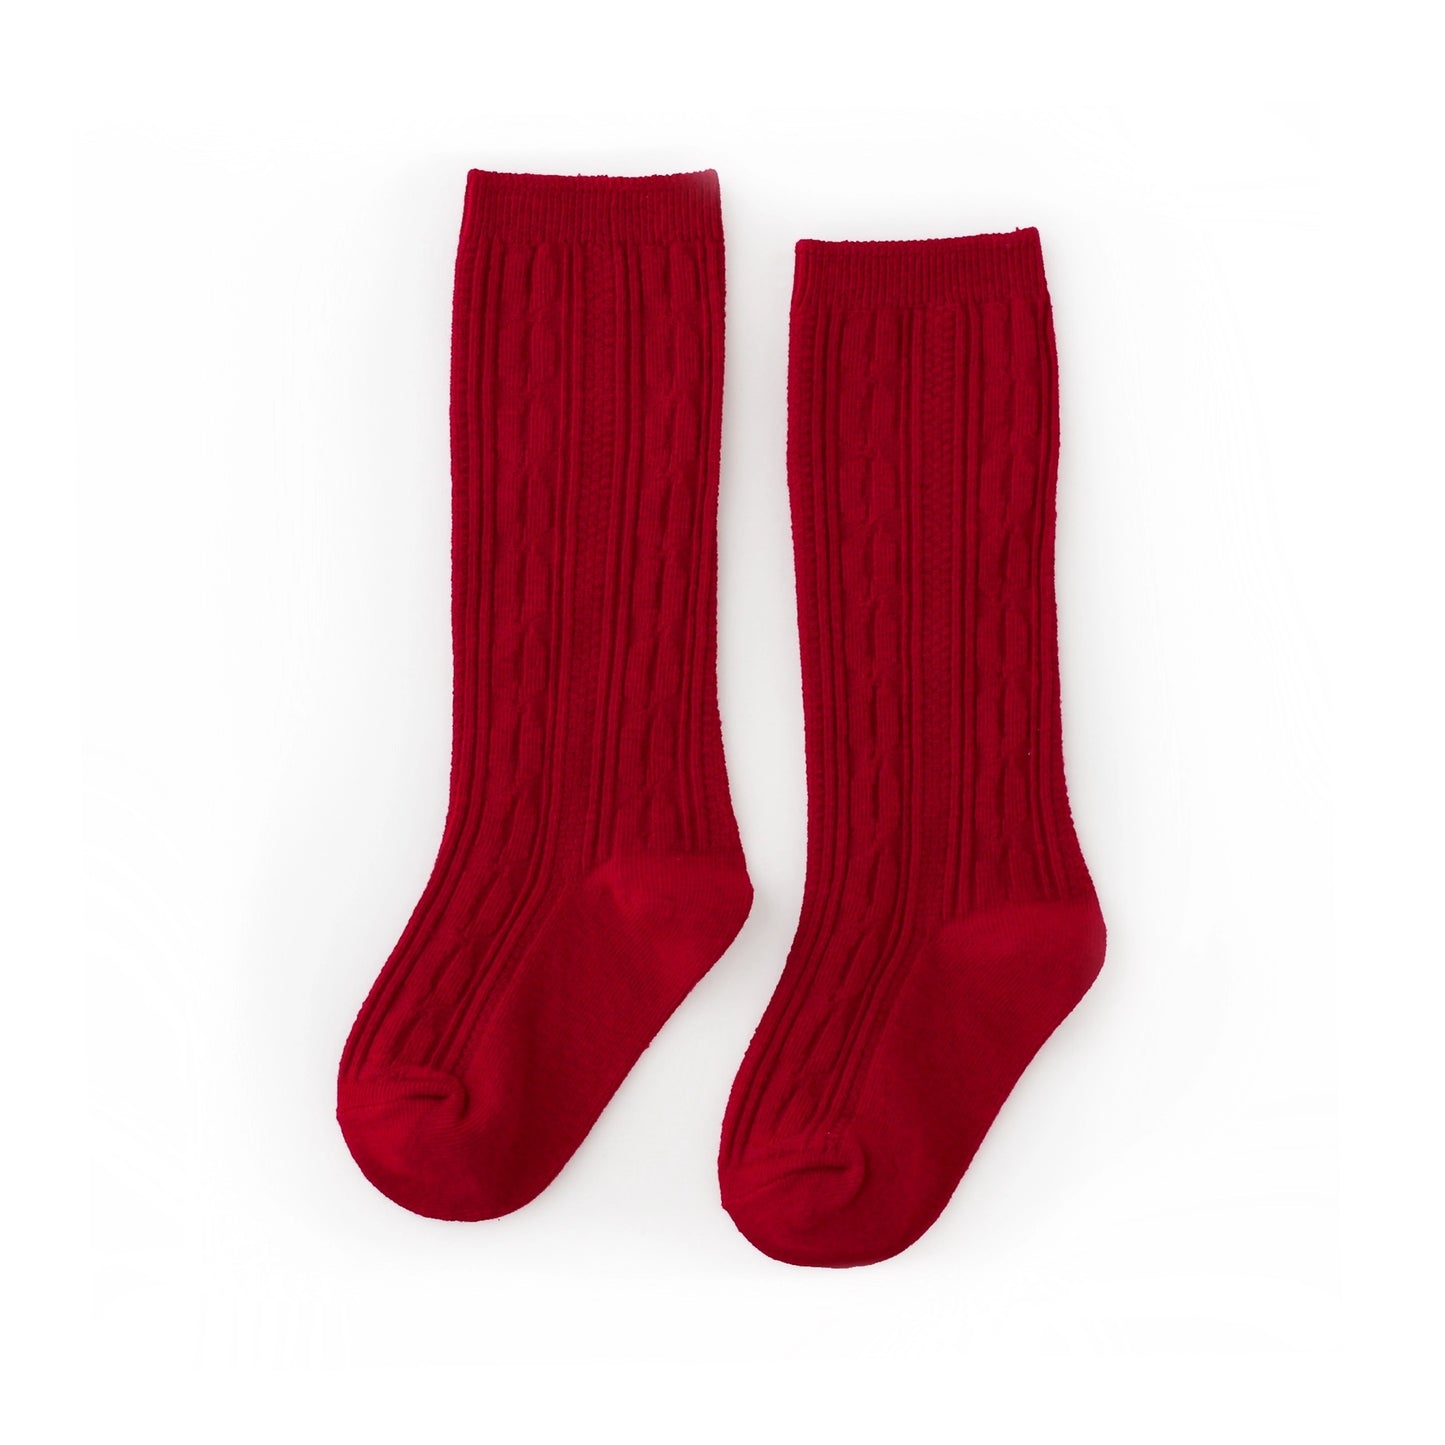 Little Stocking Co True Red Cable Knit Knee High Socks